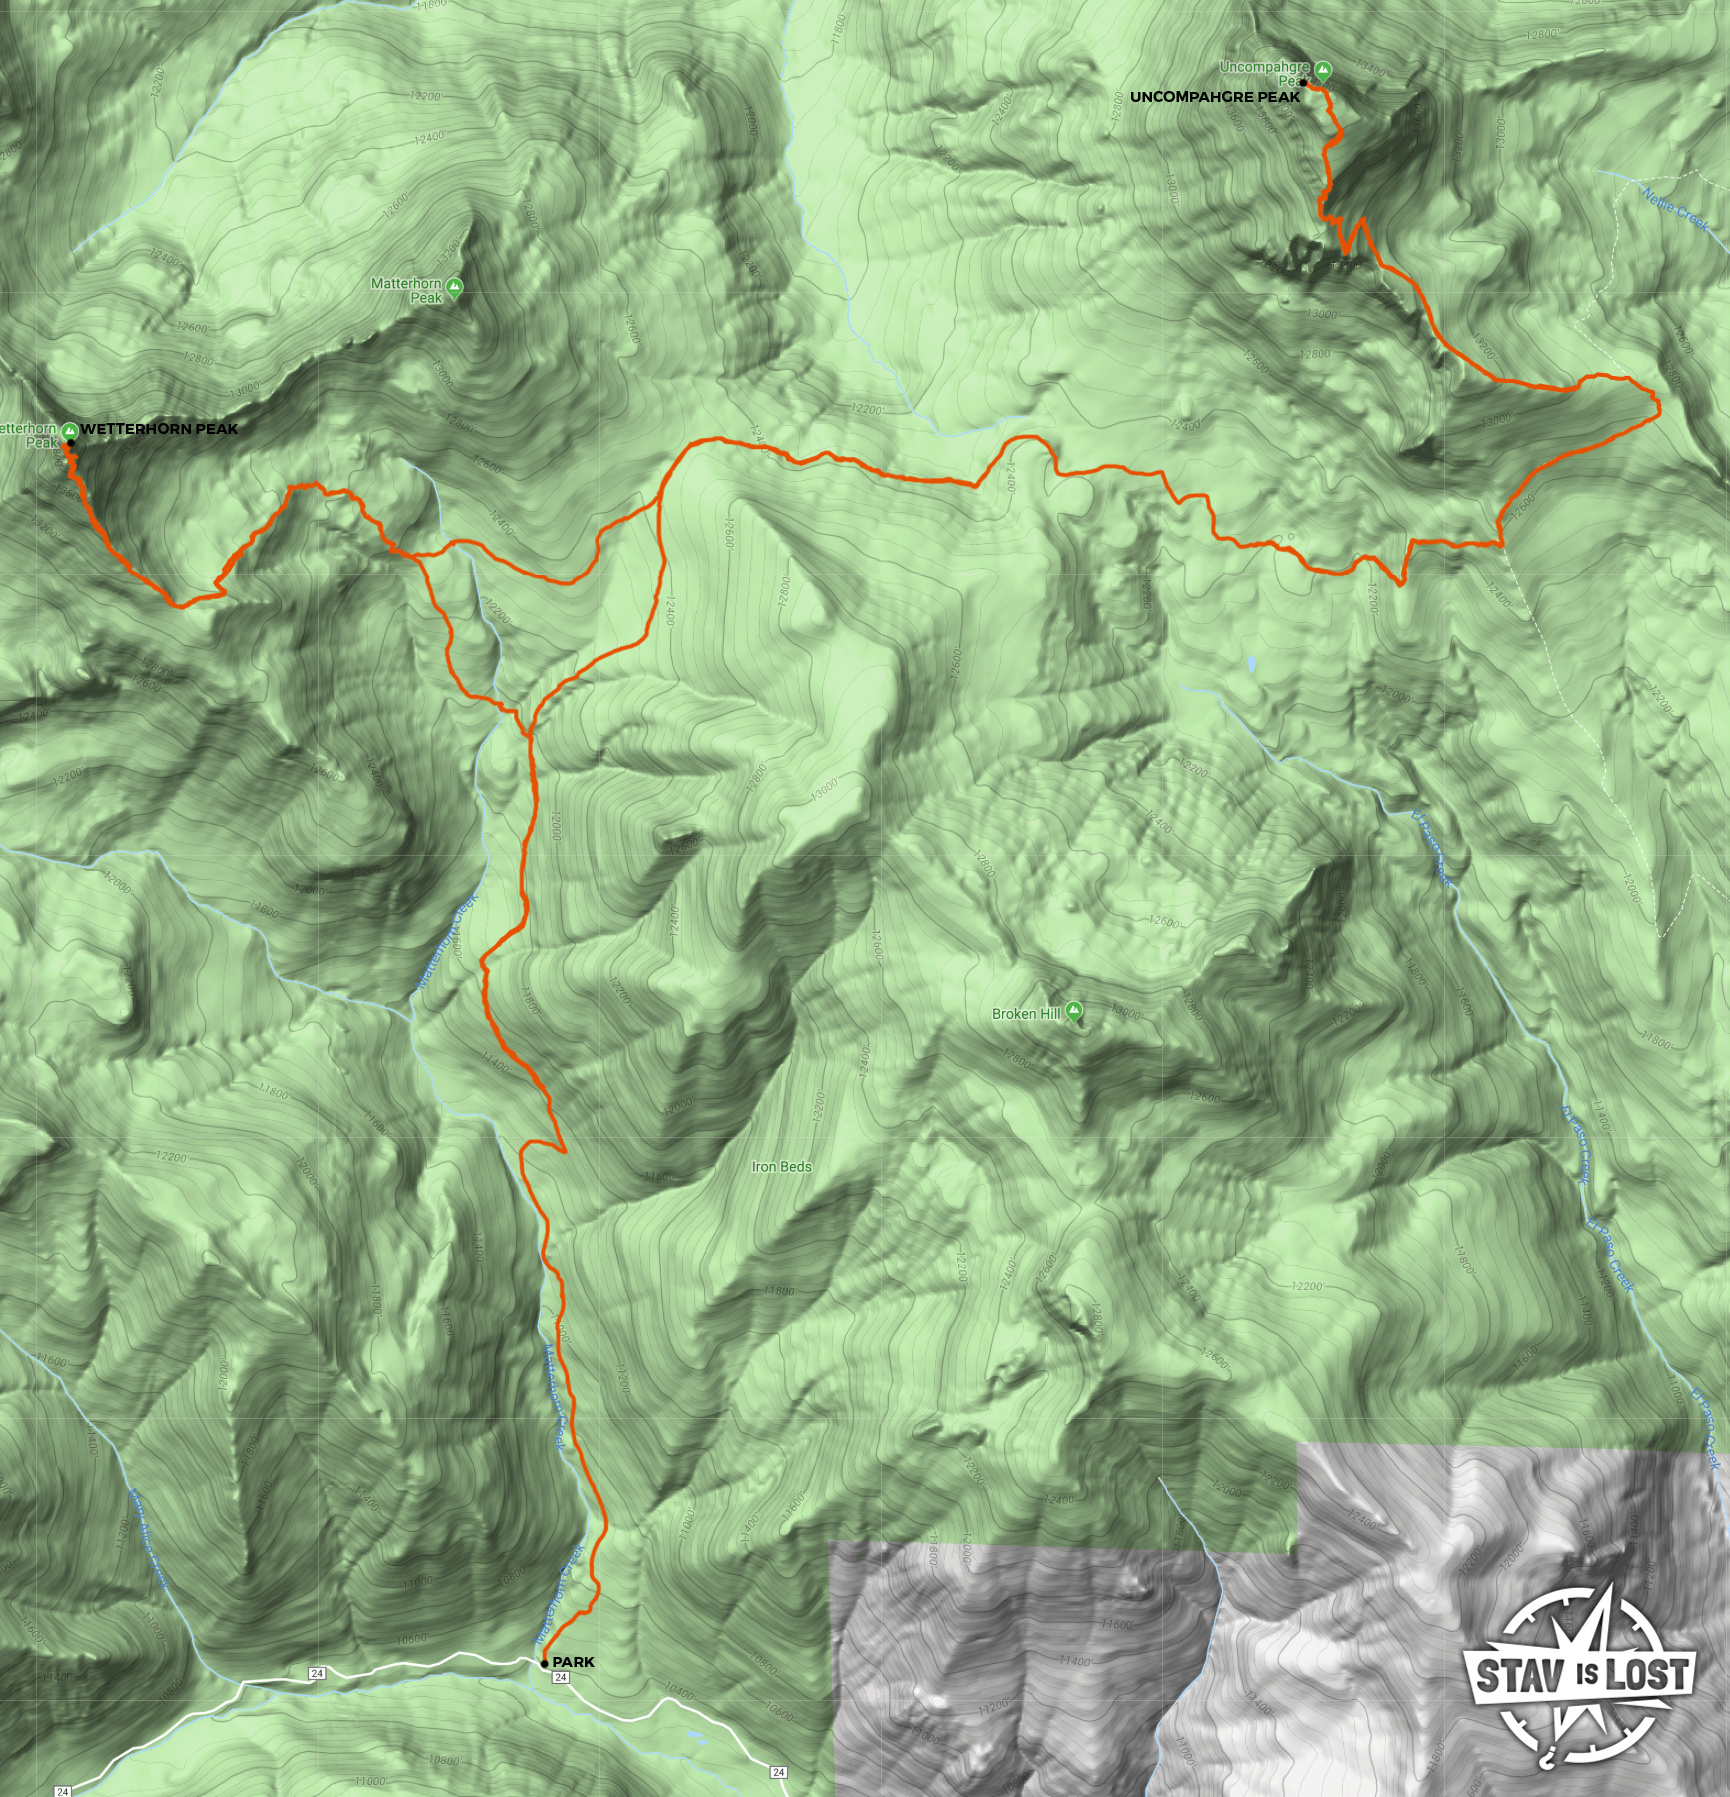 map for Wetterhorn and Uncompahgre Peaks by stav is lost